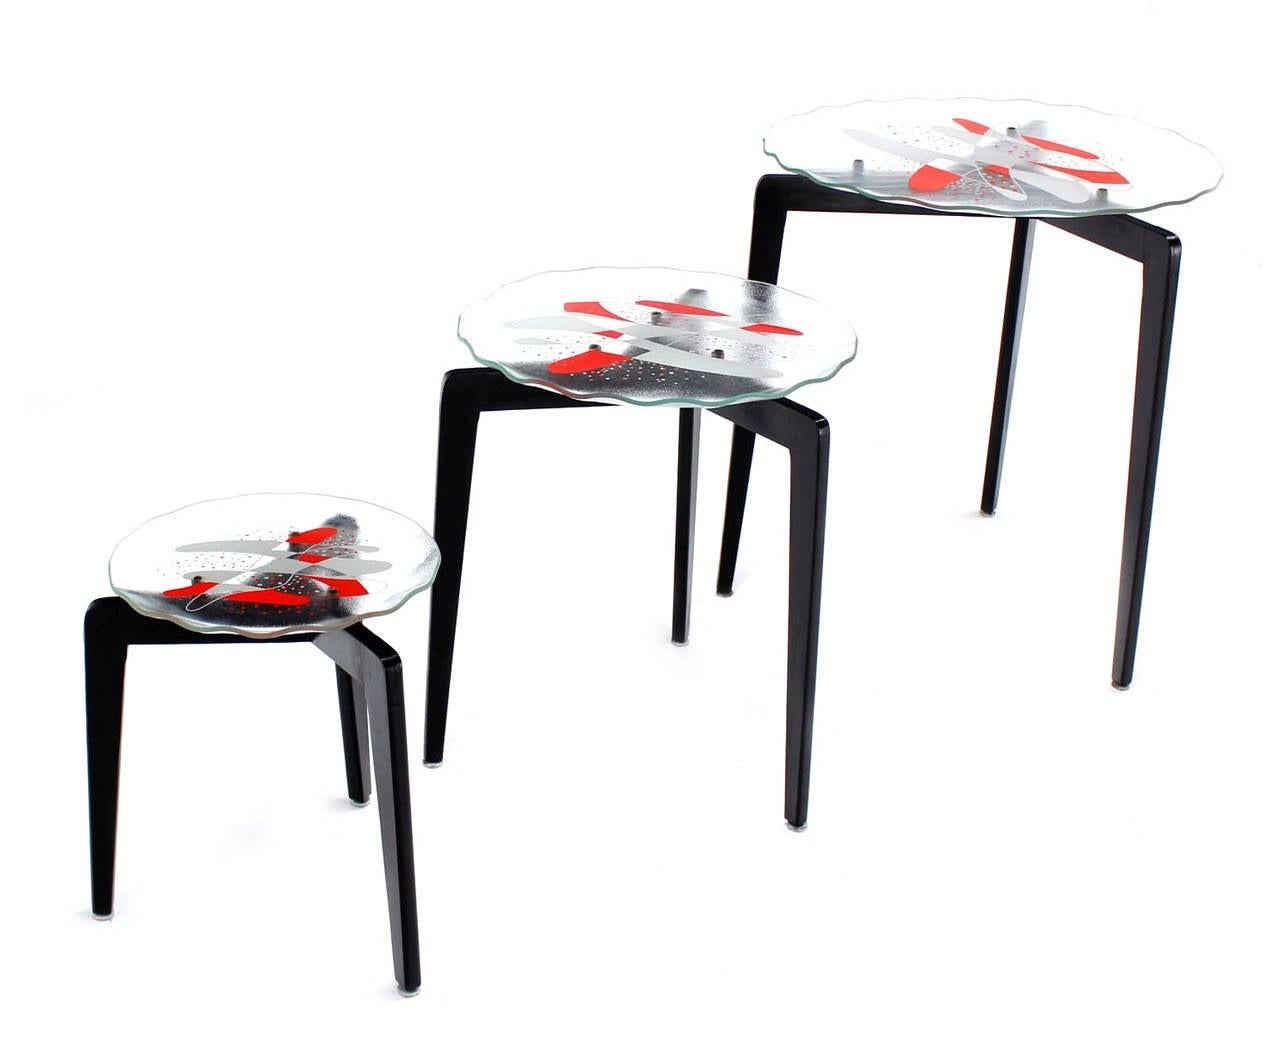 Set of 3 Art glass nesting side occasional side end tables. Nice tapered legs design. Black lacquer finish. Etched glass tops white and red lacquer design pattern.